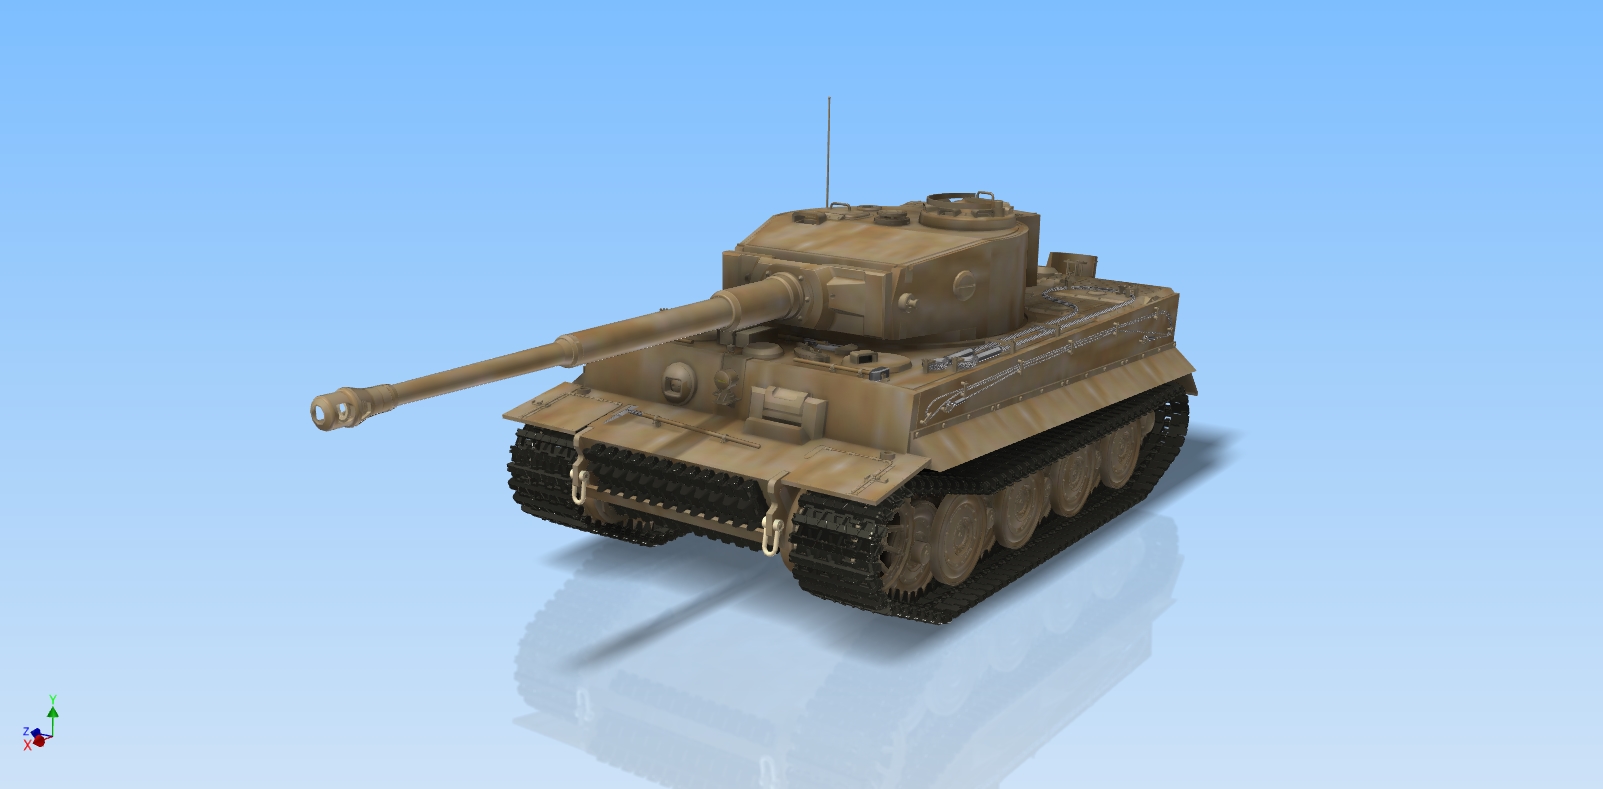 3D model Tank Tiger 1 scale 1to16 scale Autodesk Invent